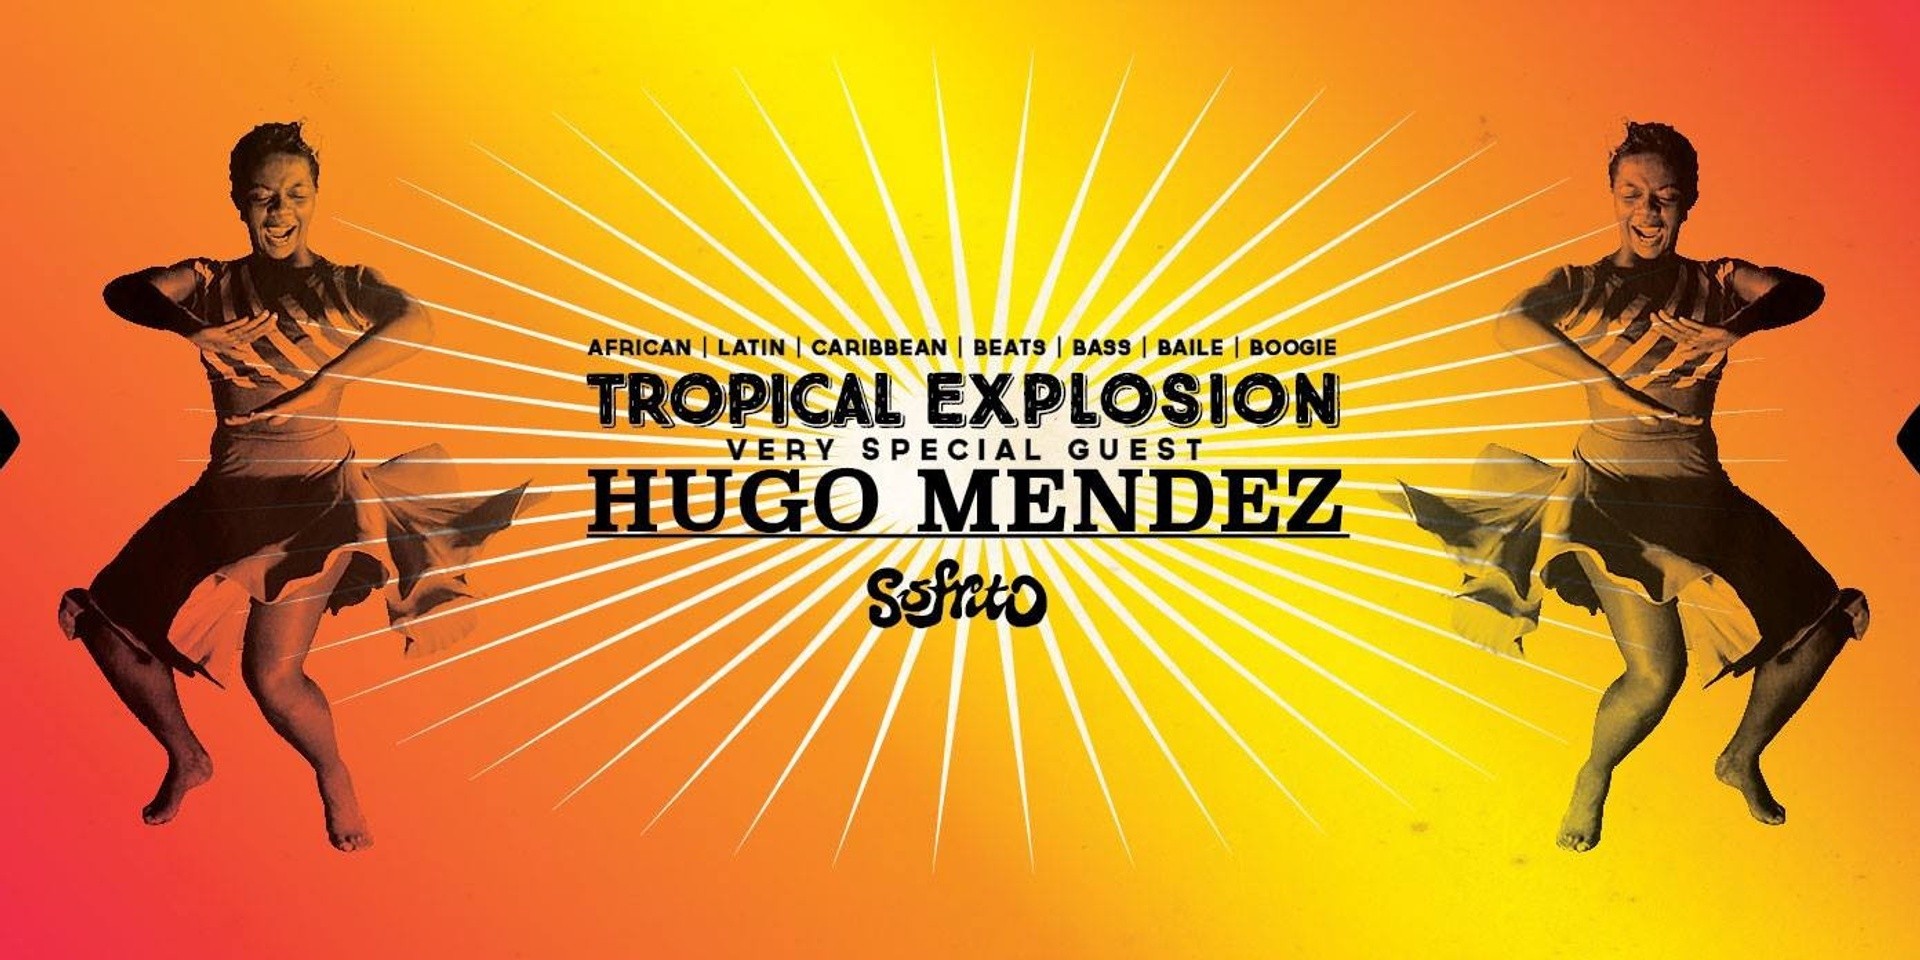 Tropical Temple celebrates Afro-Caribbean boogie and Latin rhythms with Hugo Mendez